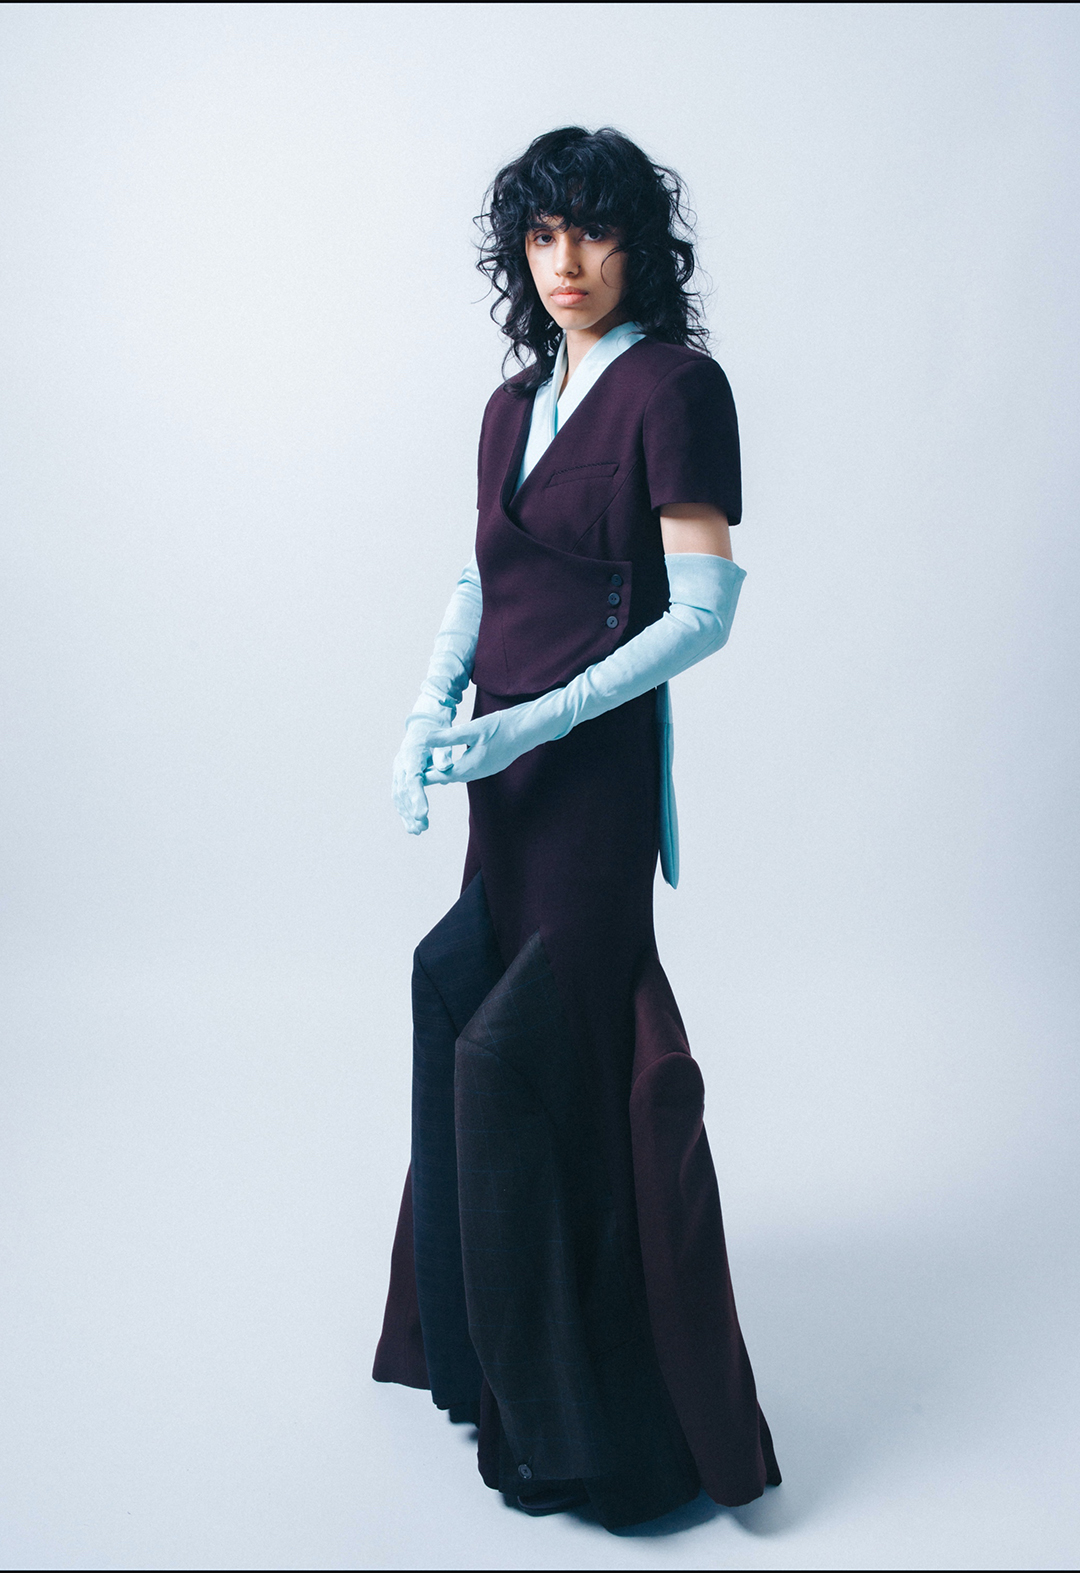 The photo presents a three-quarter view of Look 1, which consists of a dark-purple short-sleeve dress suit with wavy seams and re-engineered blazers, and features an exaggerated shoulder cape with gathered drape.